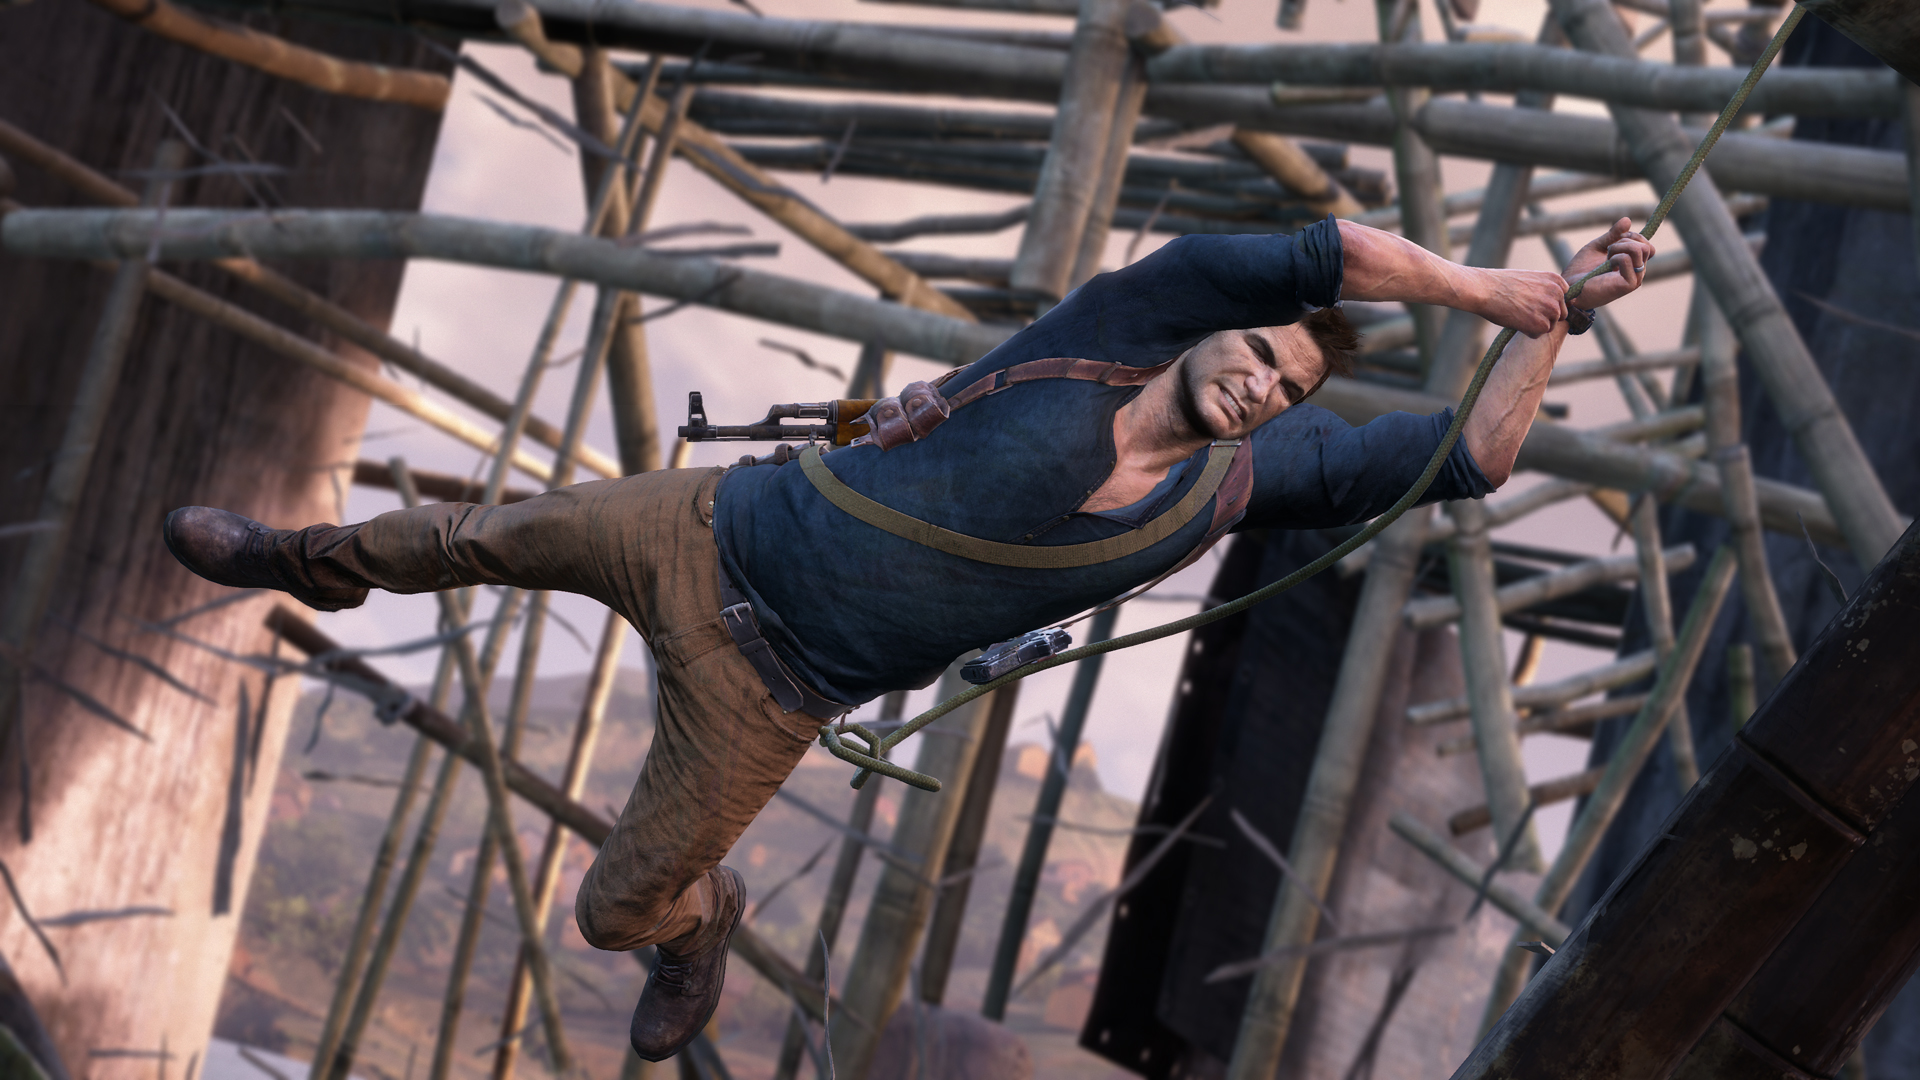 Uncharted 4 News - Nathan Drake Voice Actor Says Uncharted 4 Will